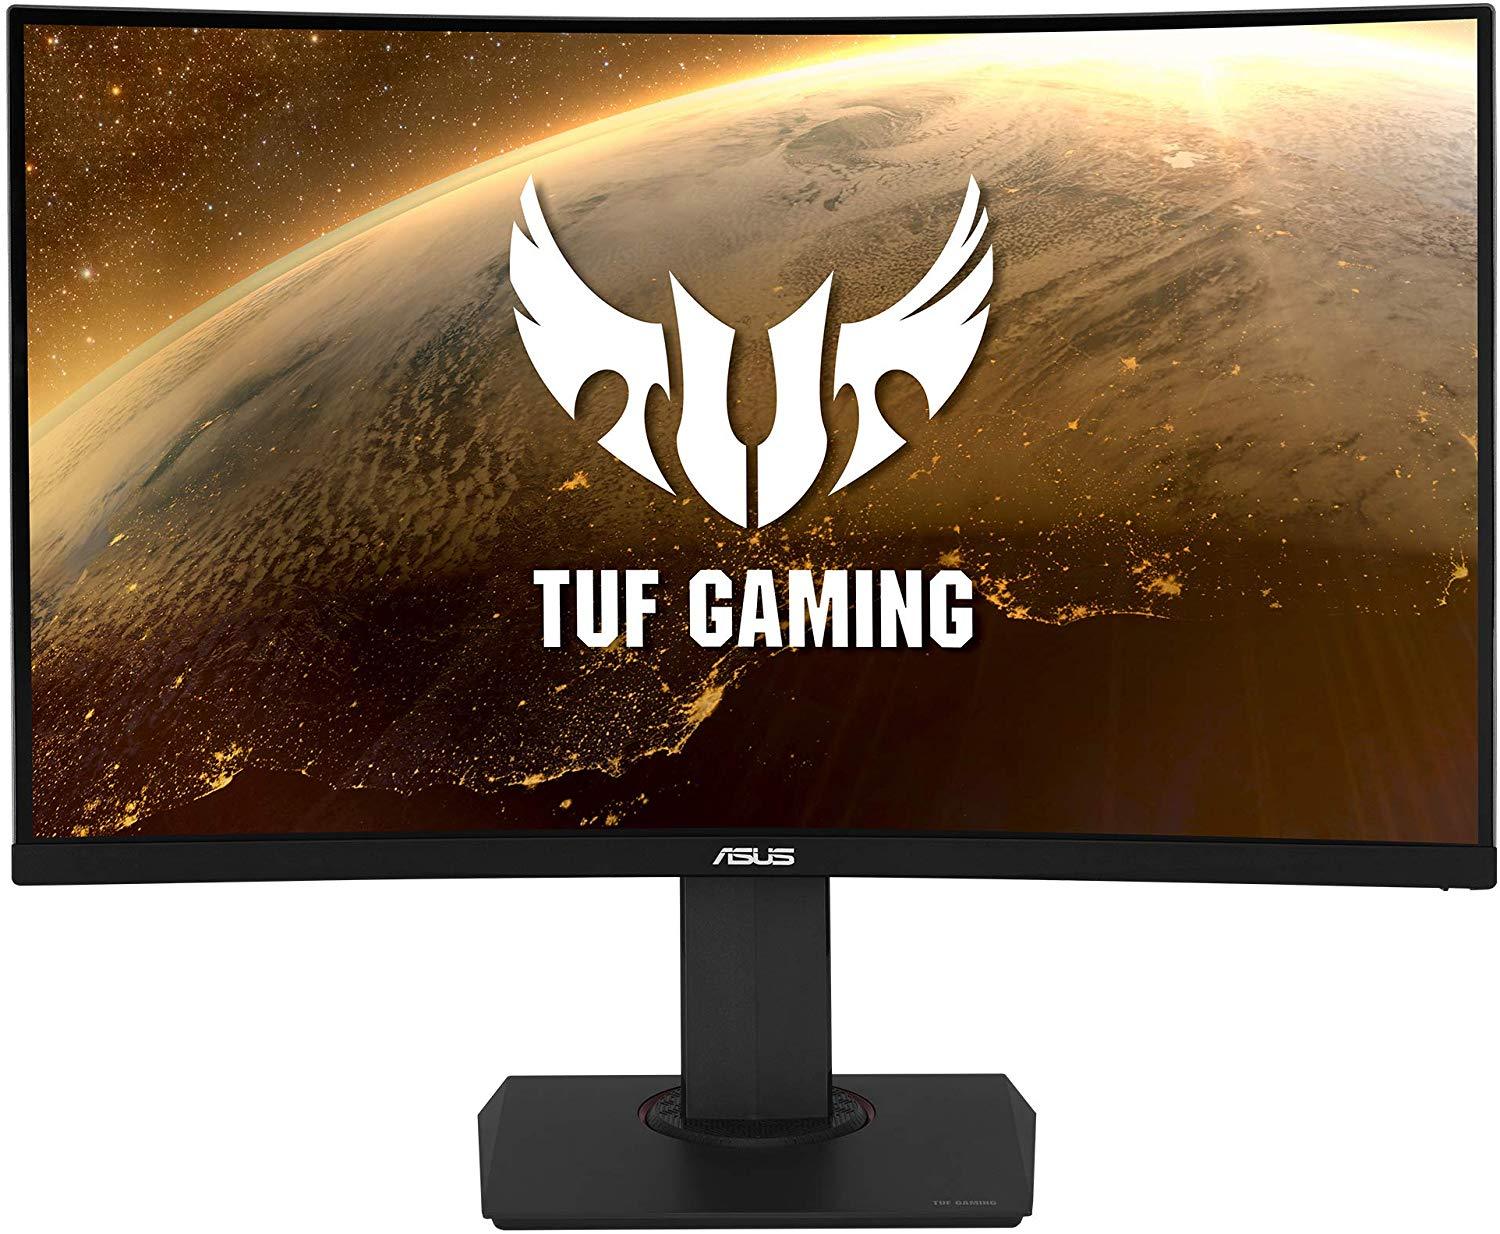 Asus Tuf Gaming 32 inches Curved Monitor Freesync 144hz (2560x1440) - Store 974 | ستور ٩٧٤